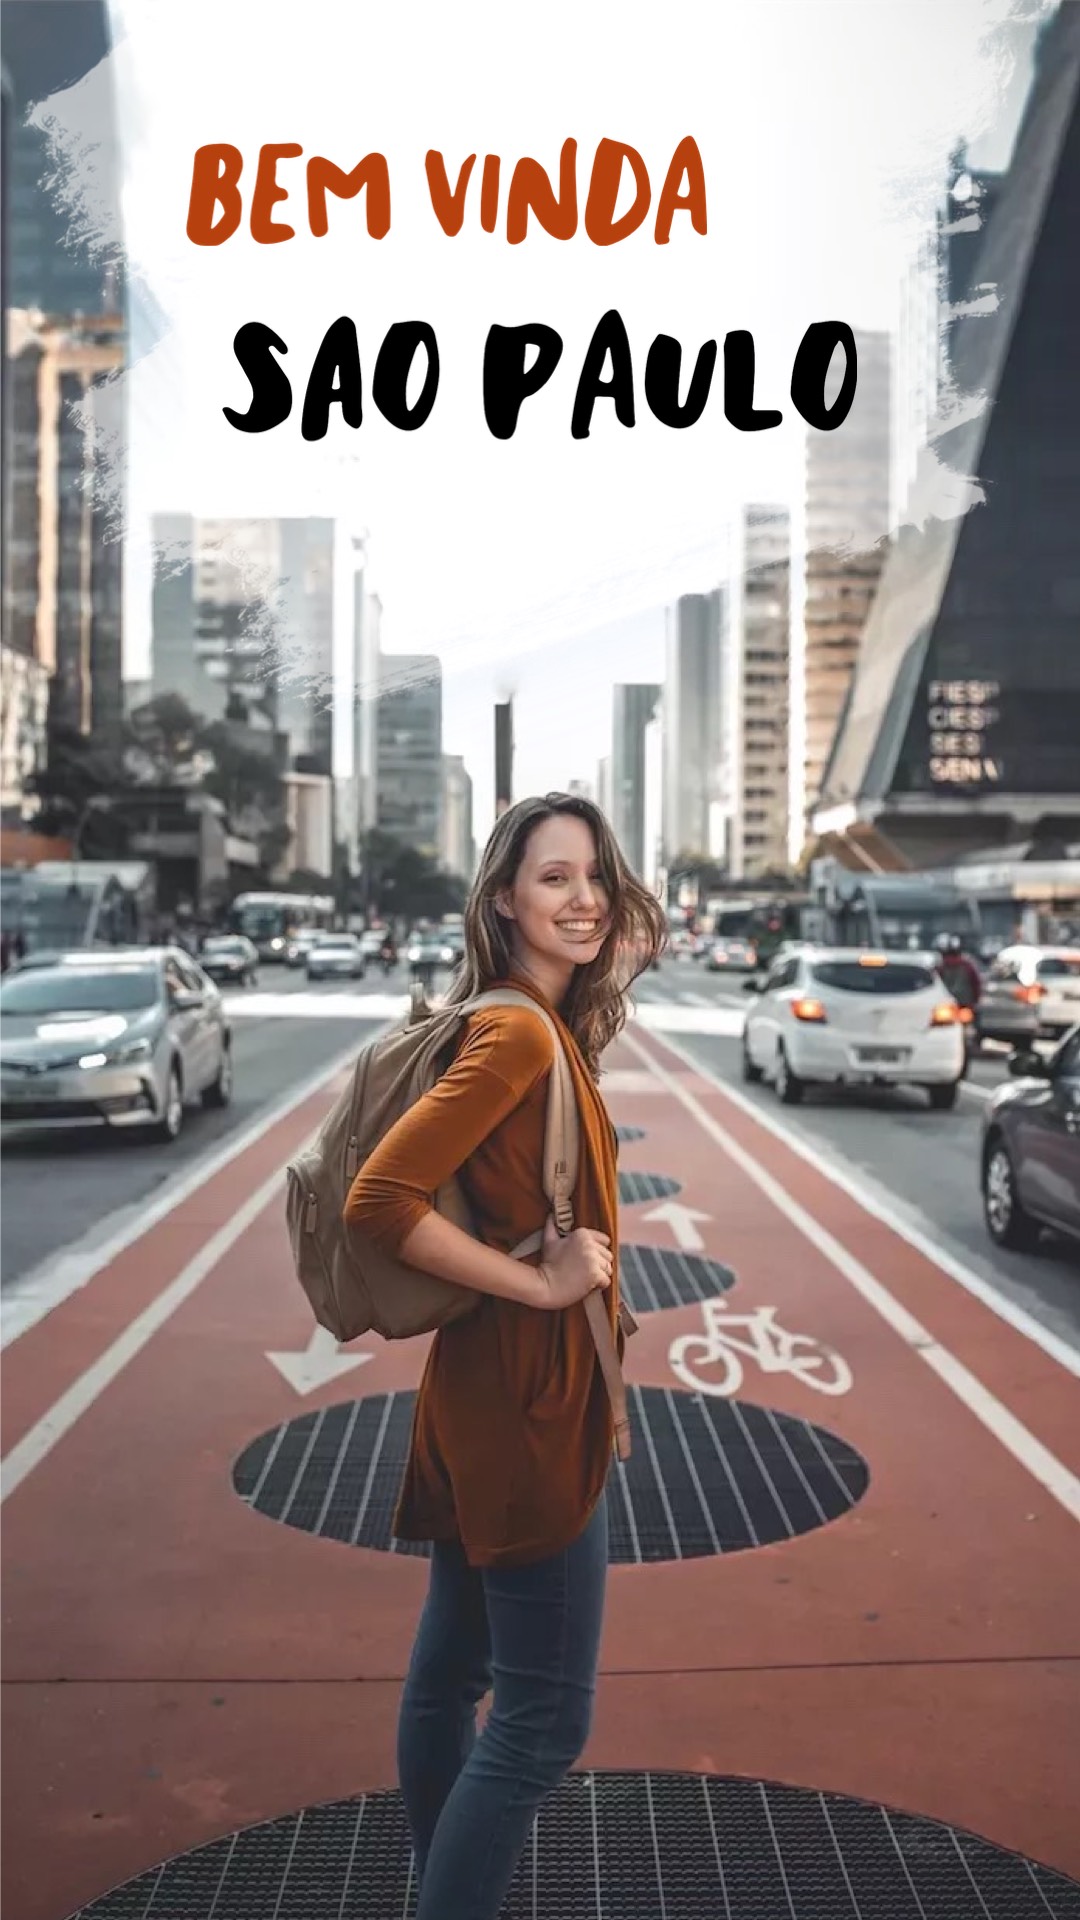 Woman in Sao Paulo travel instagram story template